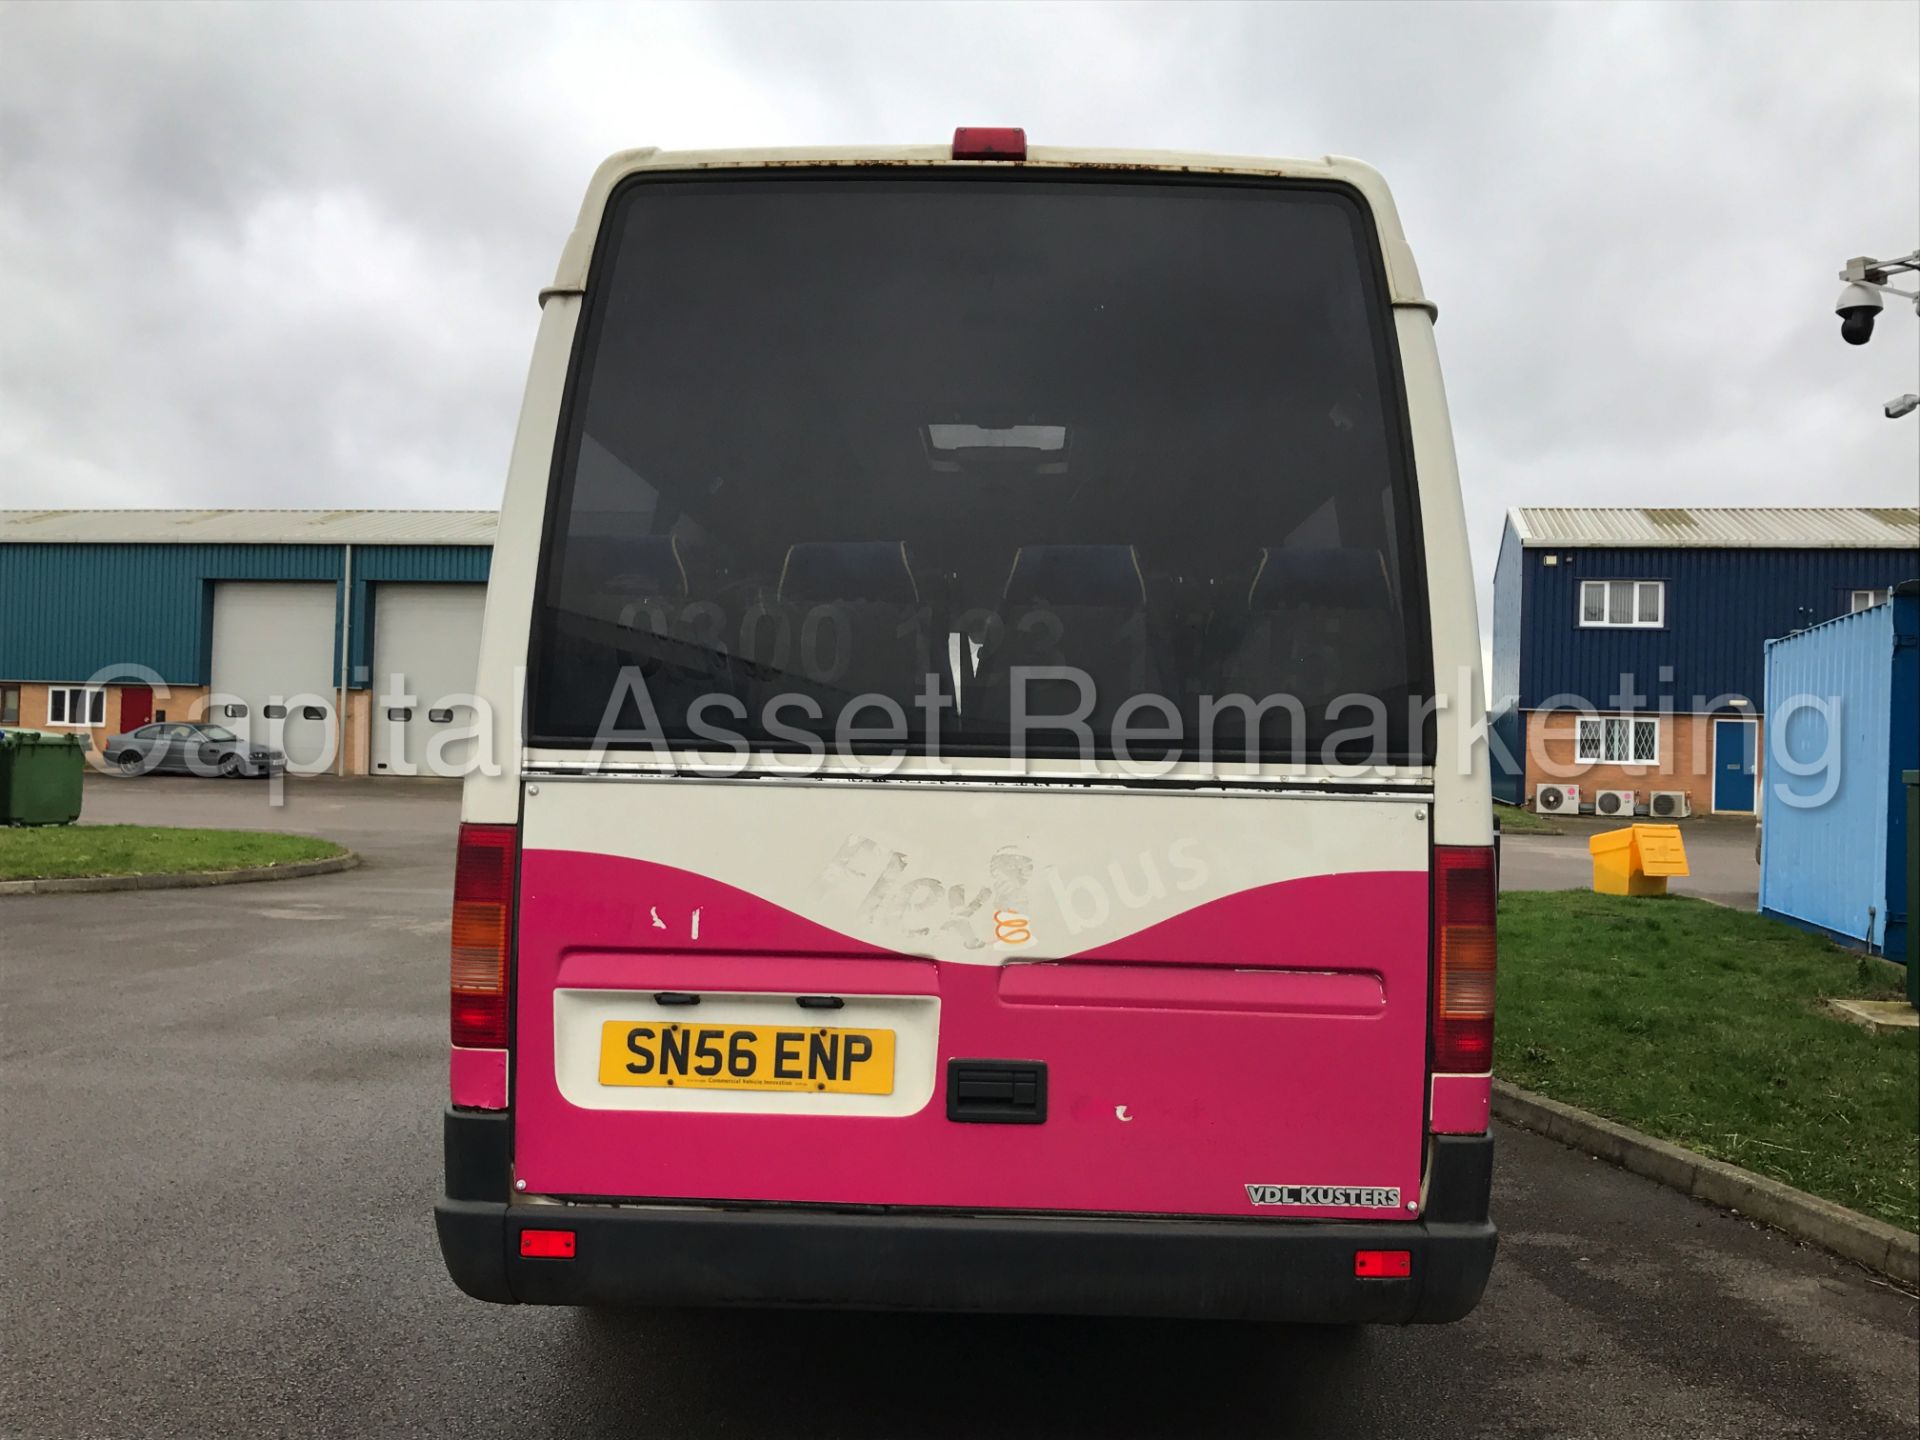 (On Sale) VOLKSWAGEN LT 46 '15 SEATER BUS / COACH' (2007 MODEL) '2.5 TDI - LWB - COIF' **VERY RARE** - Image 4 of 17